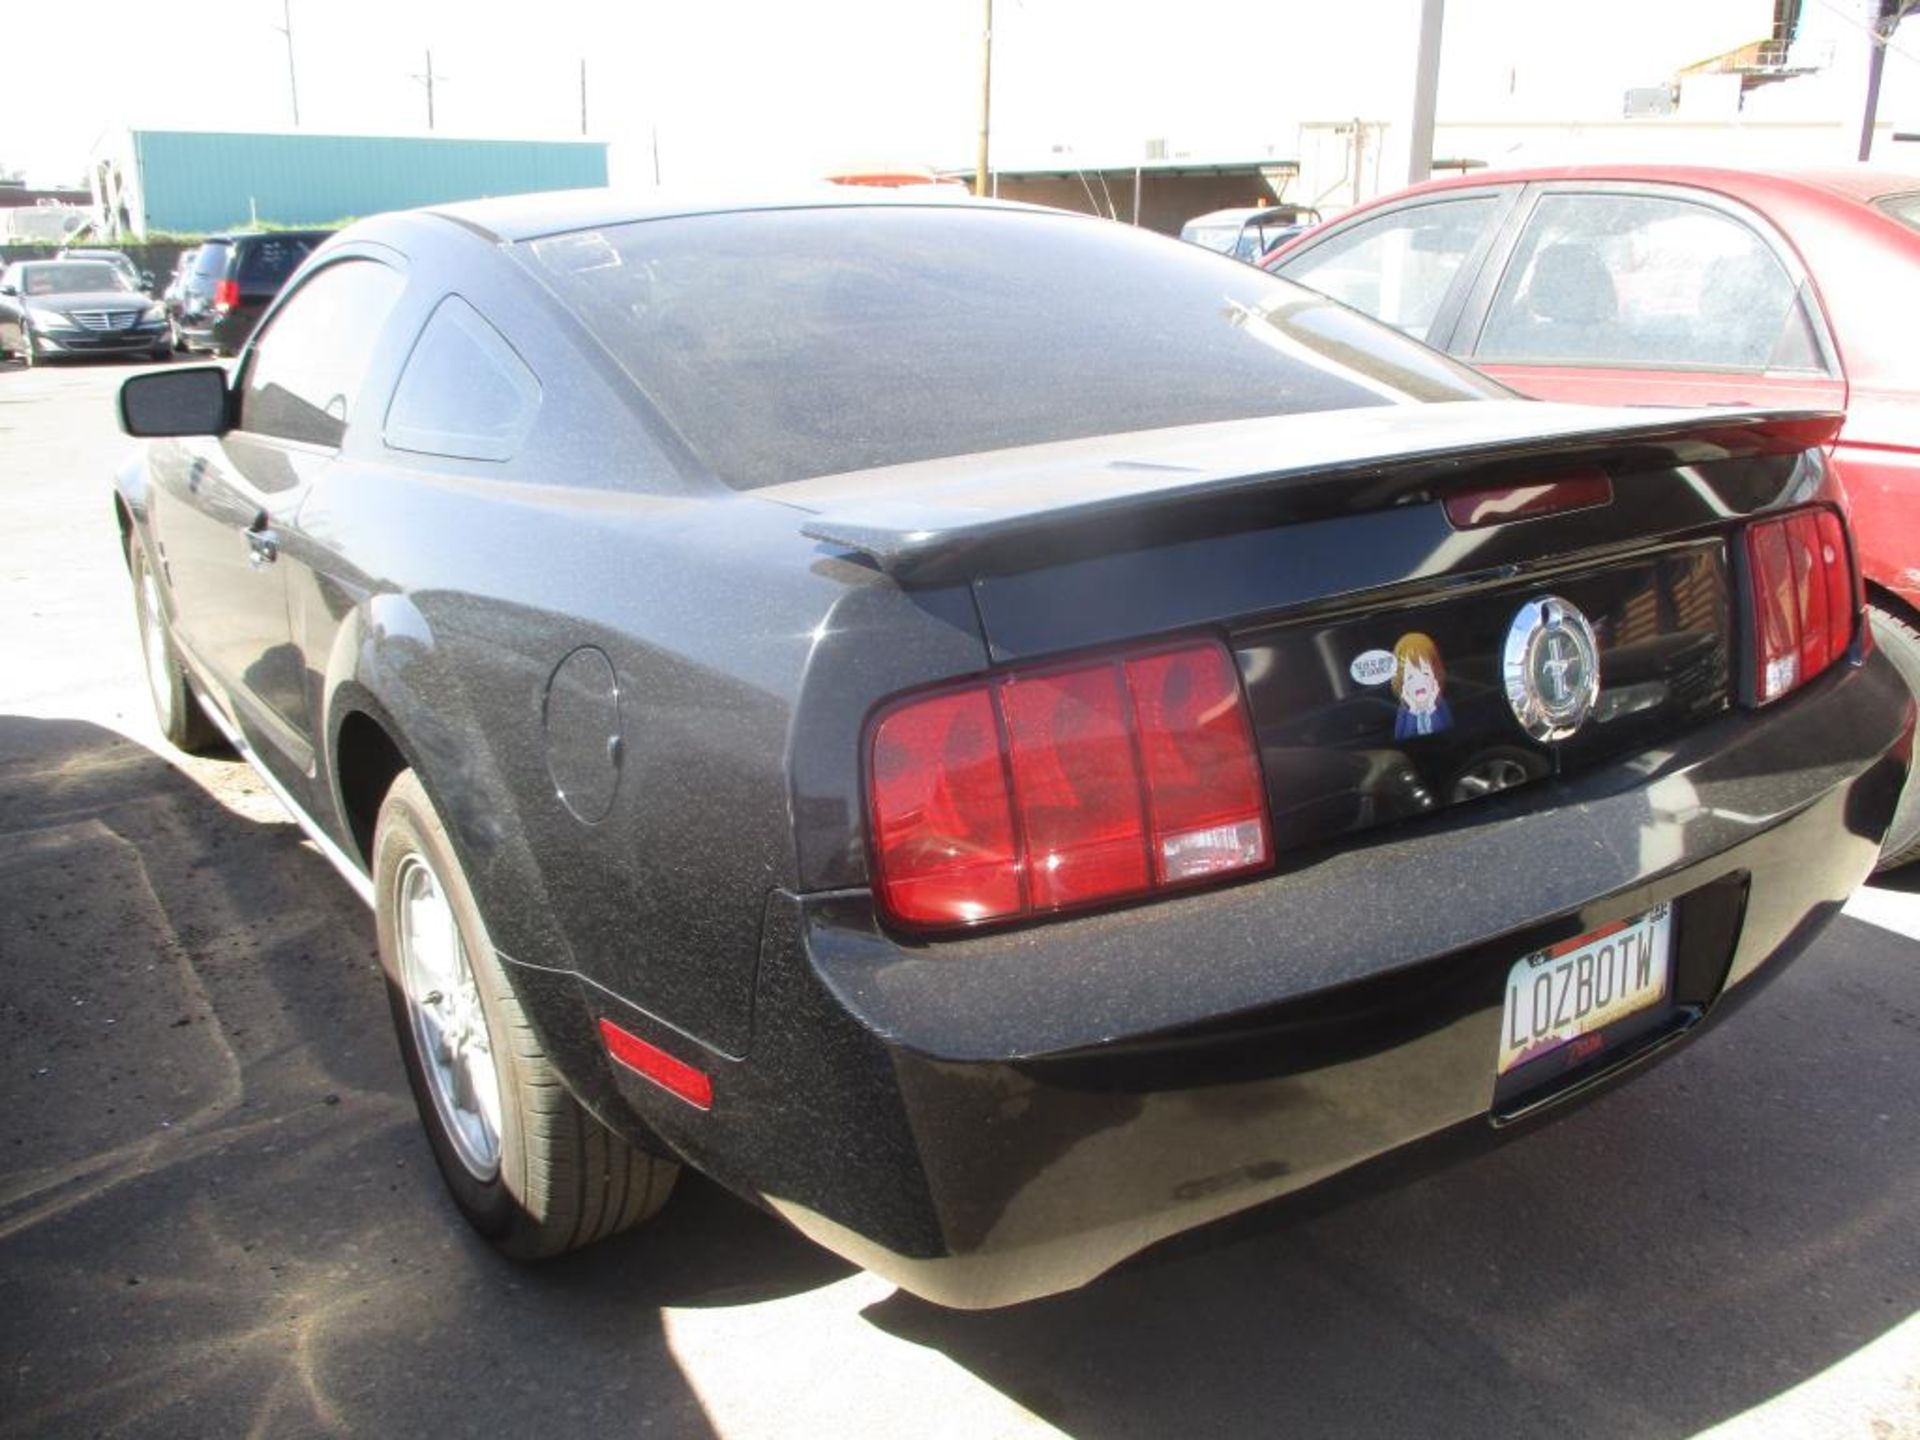 (Lot # 3322) 2007 Ford Mustang - Image 2 of 11